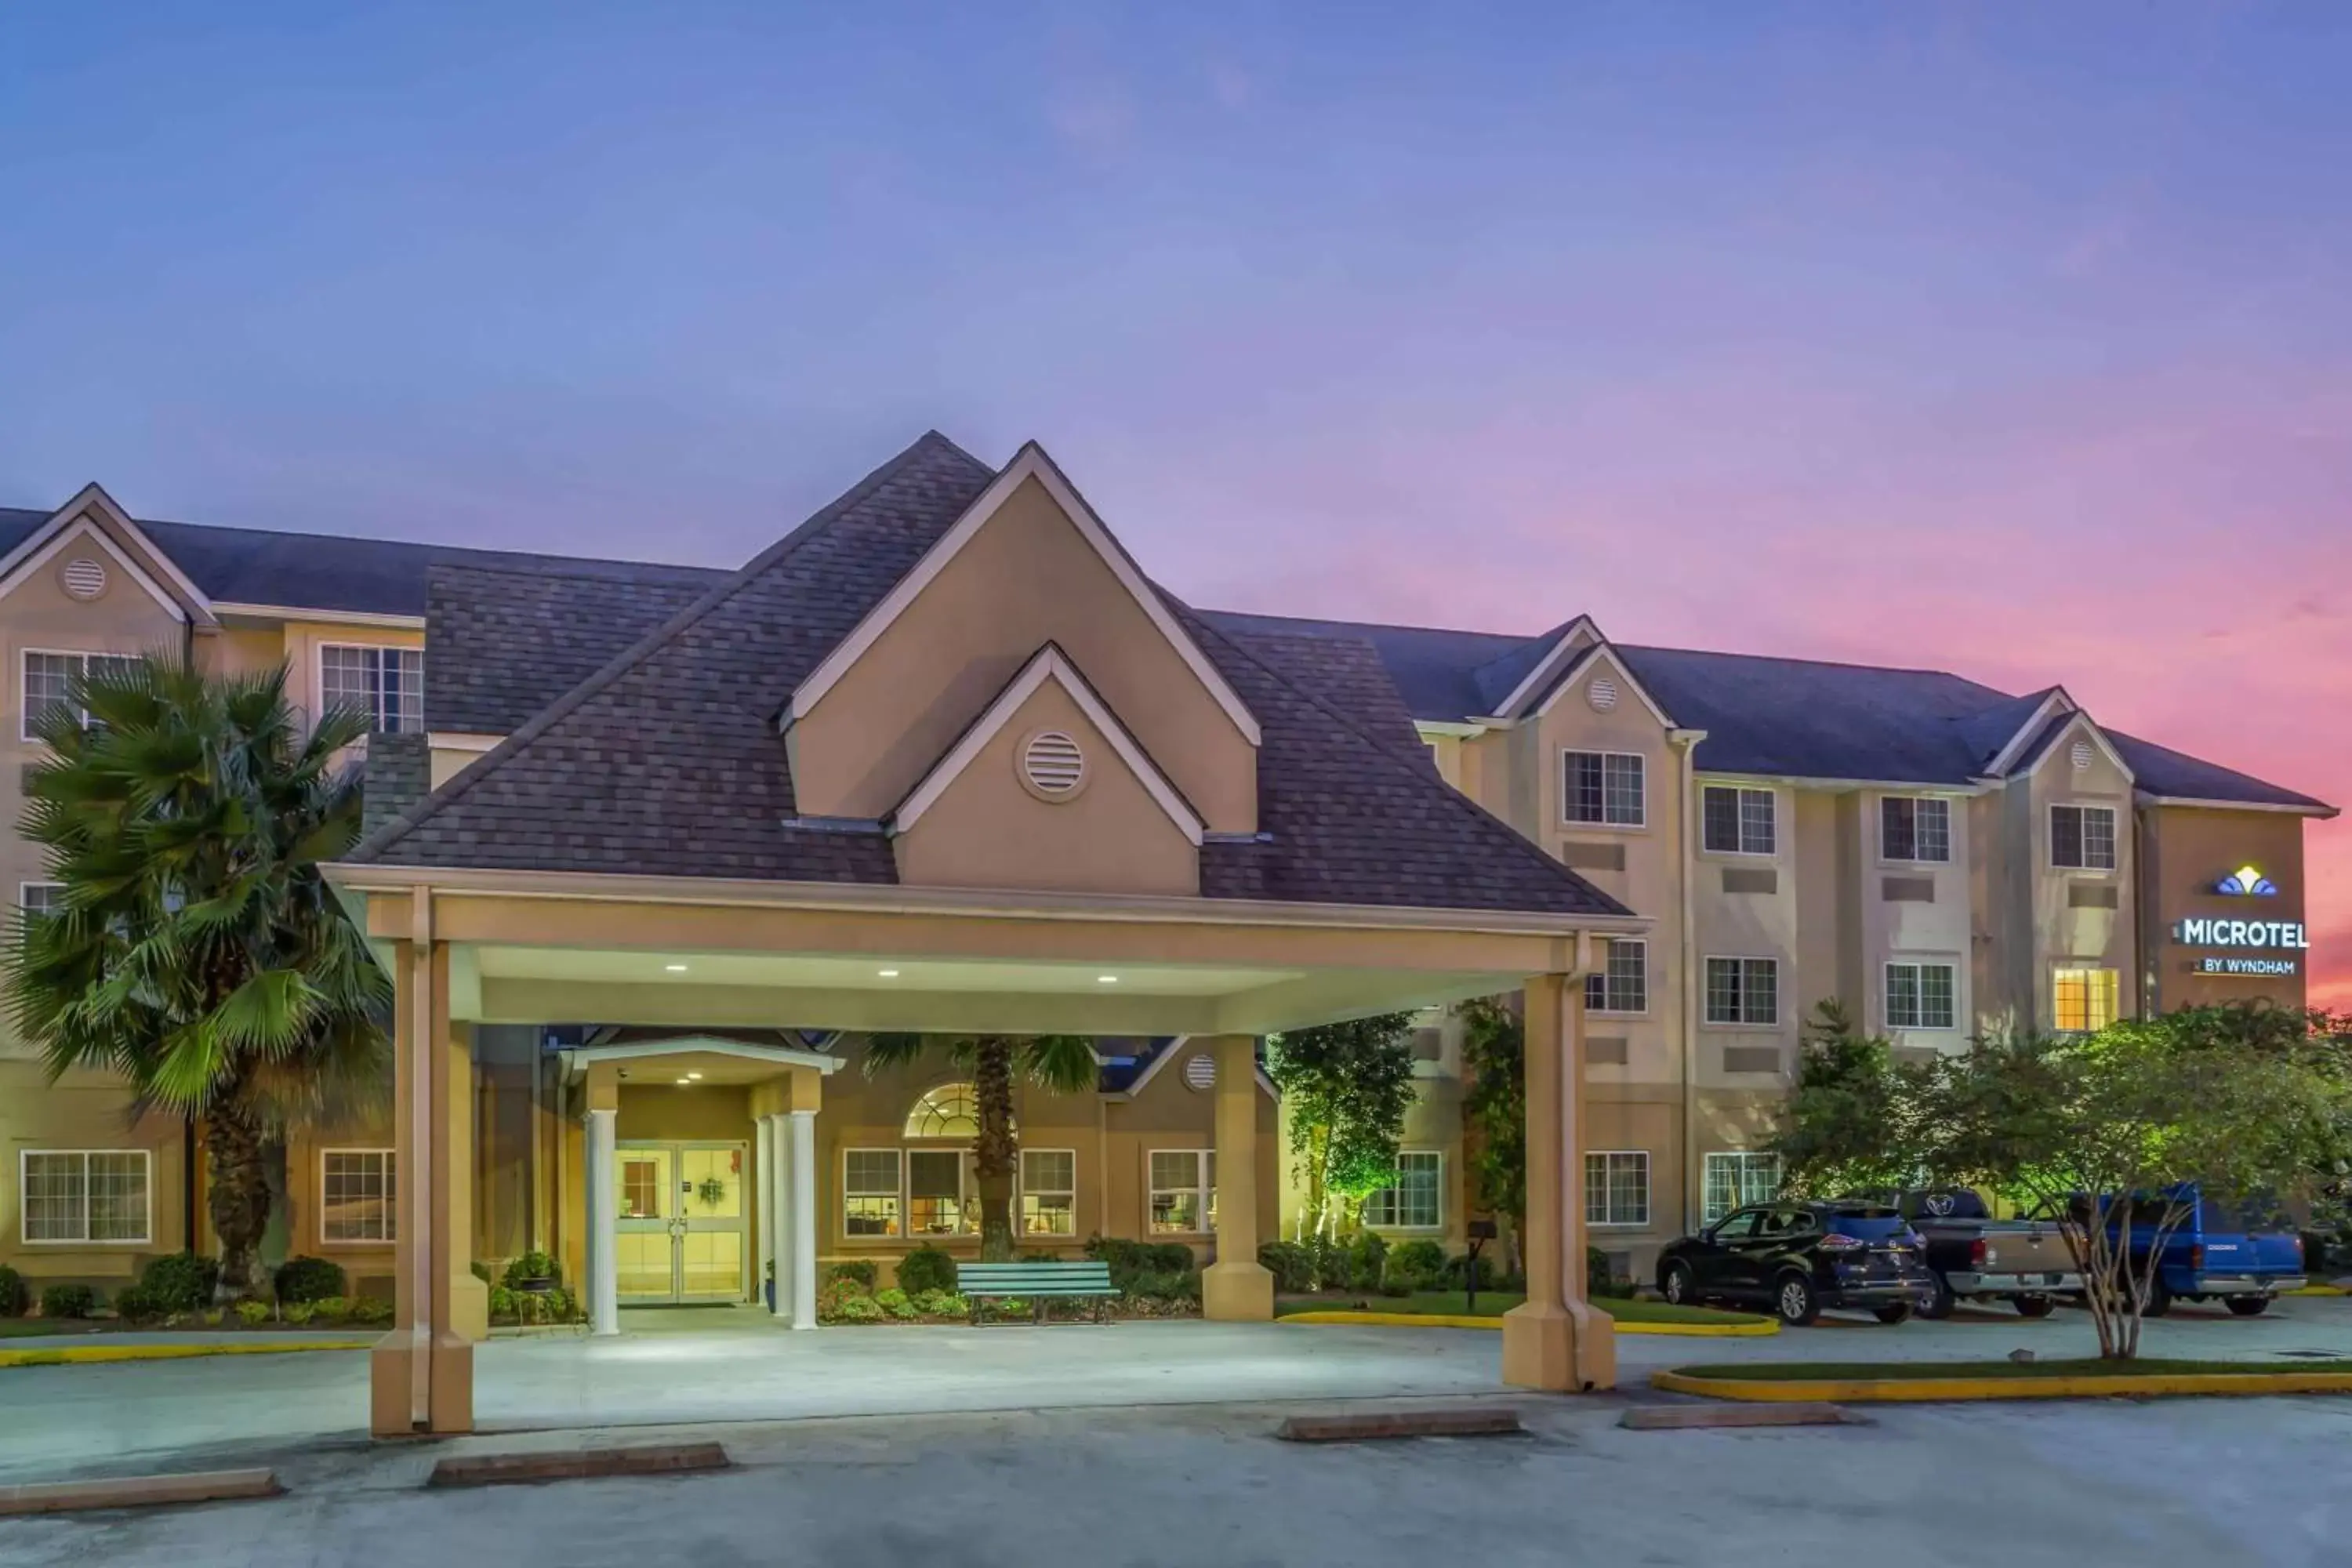 Property Building in Microtel Inn & Suites by Wyndham of Houma